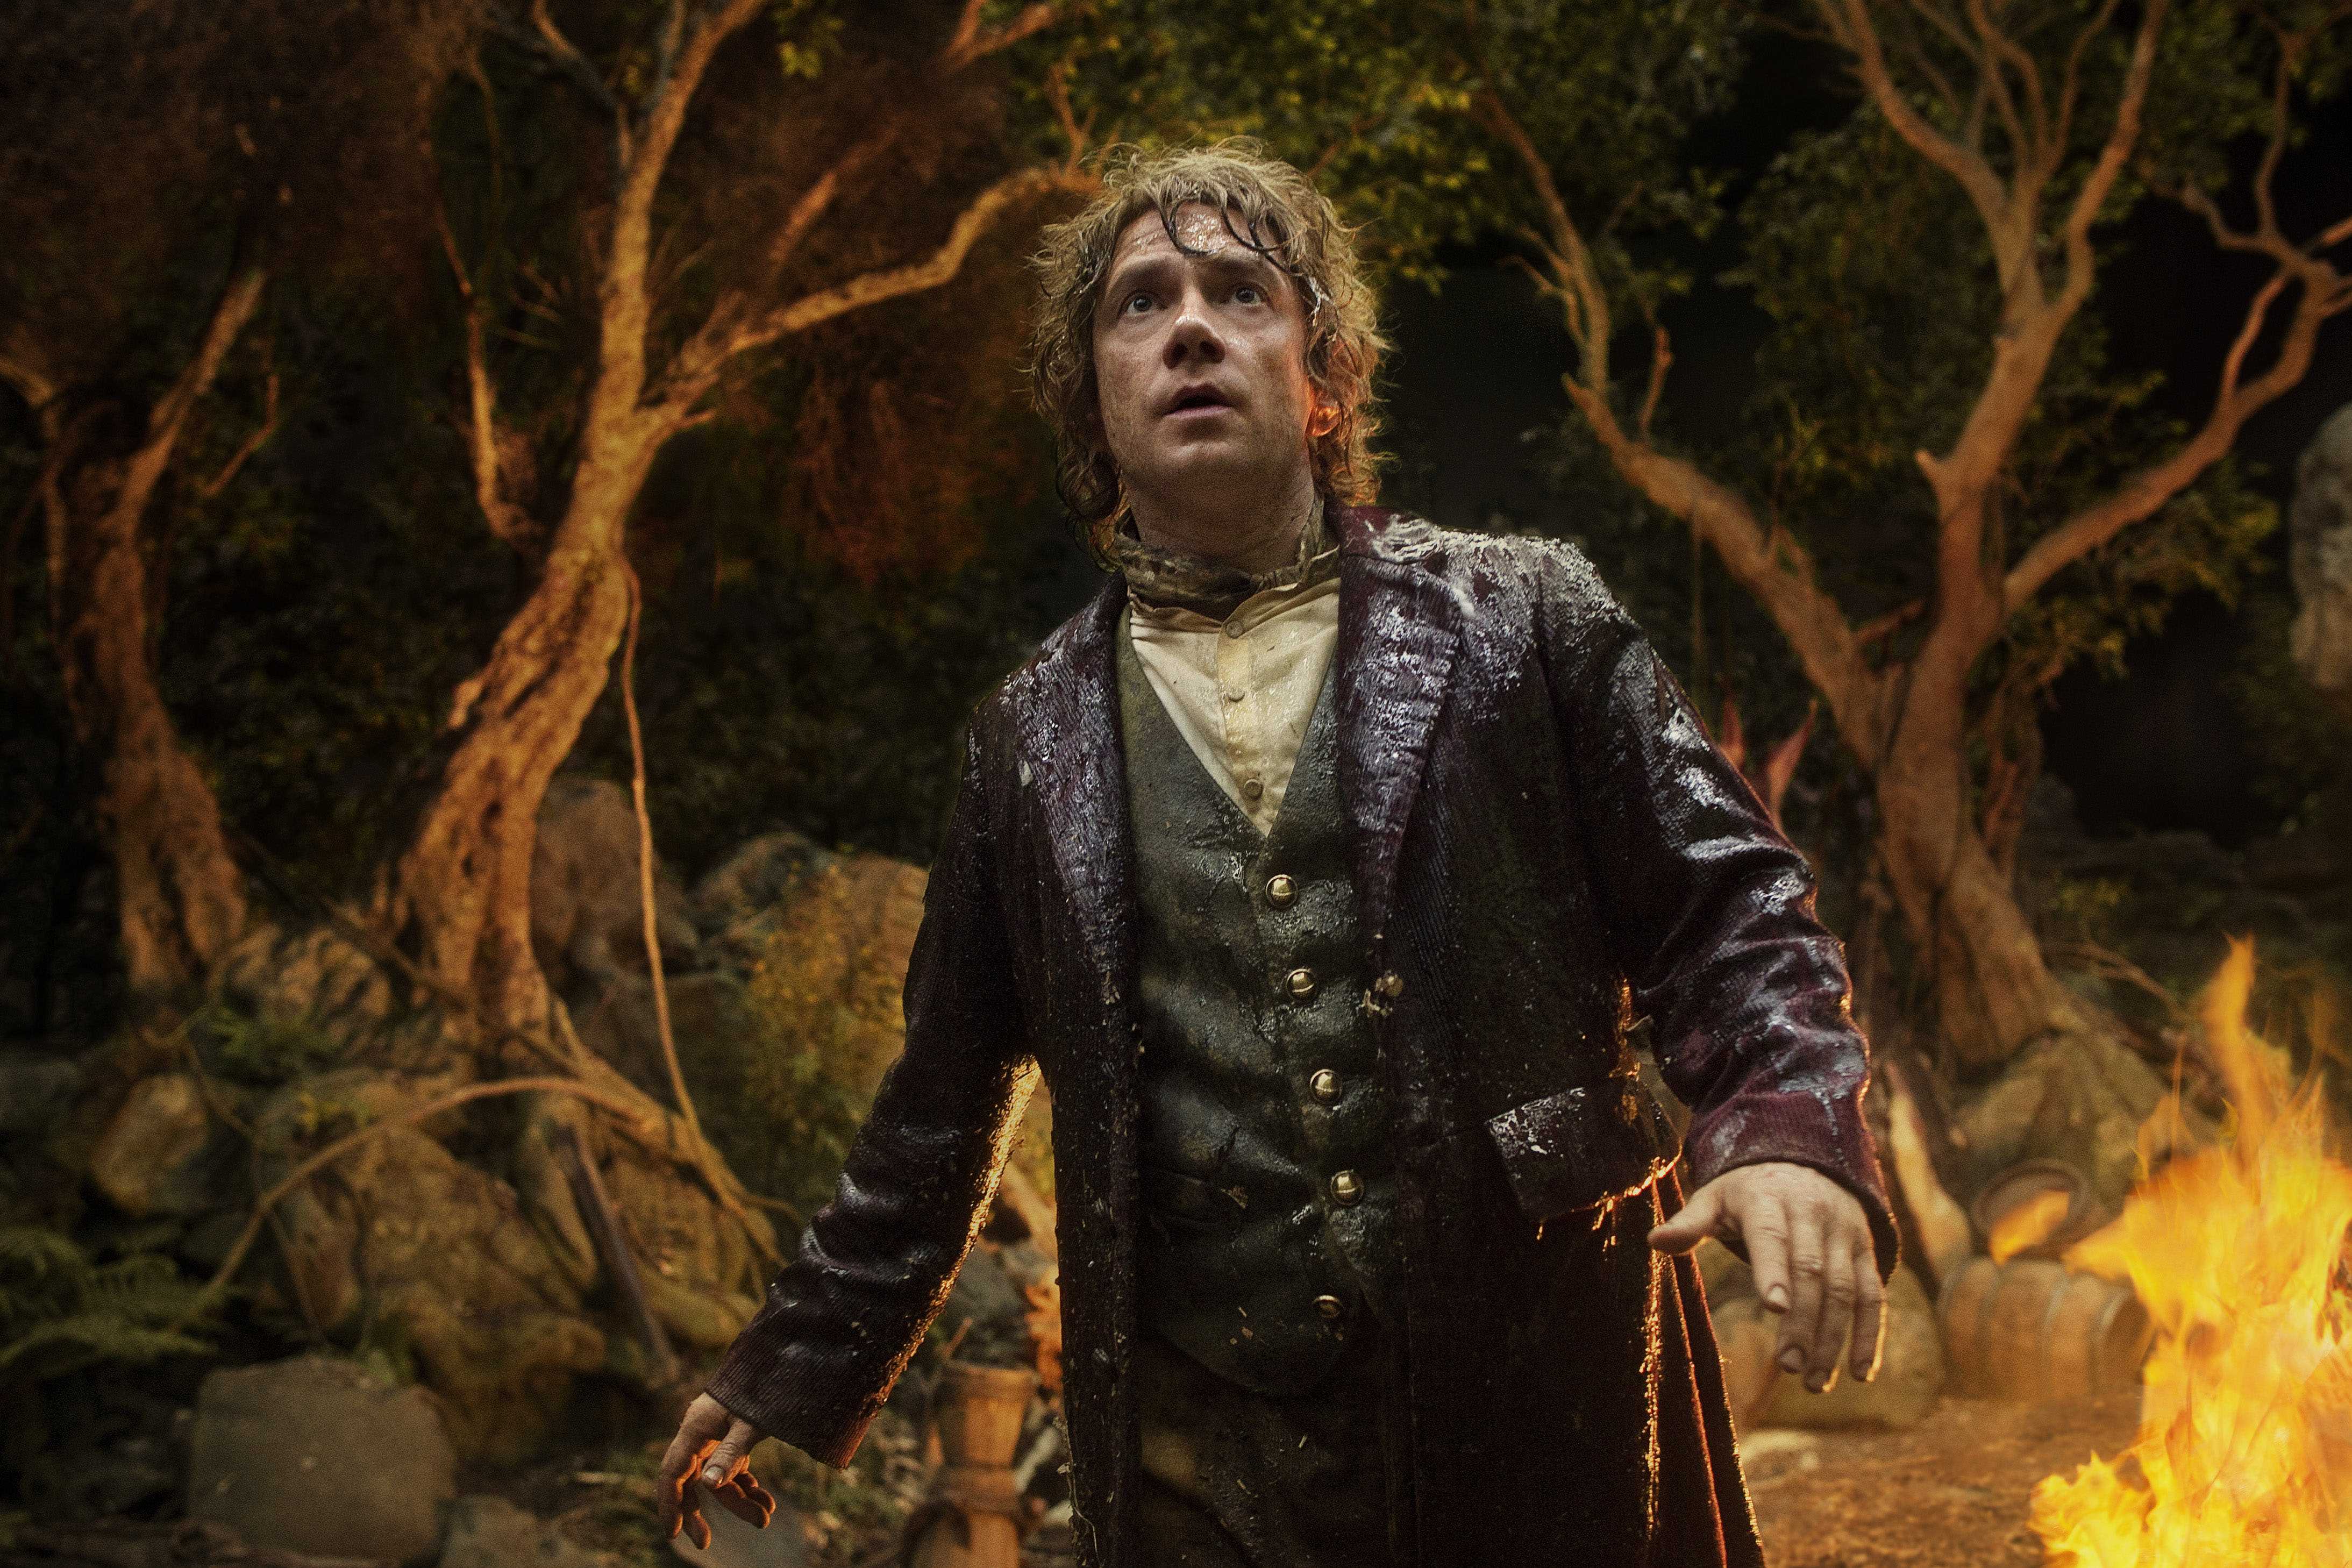 The Lord of the Rings • The Hobbit MOVIE LINES image Bilbo